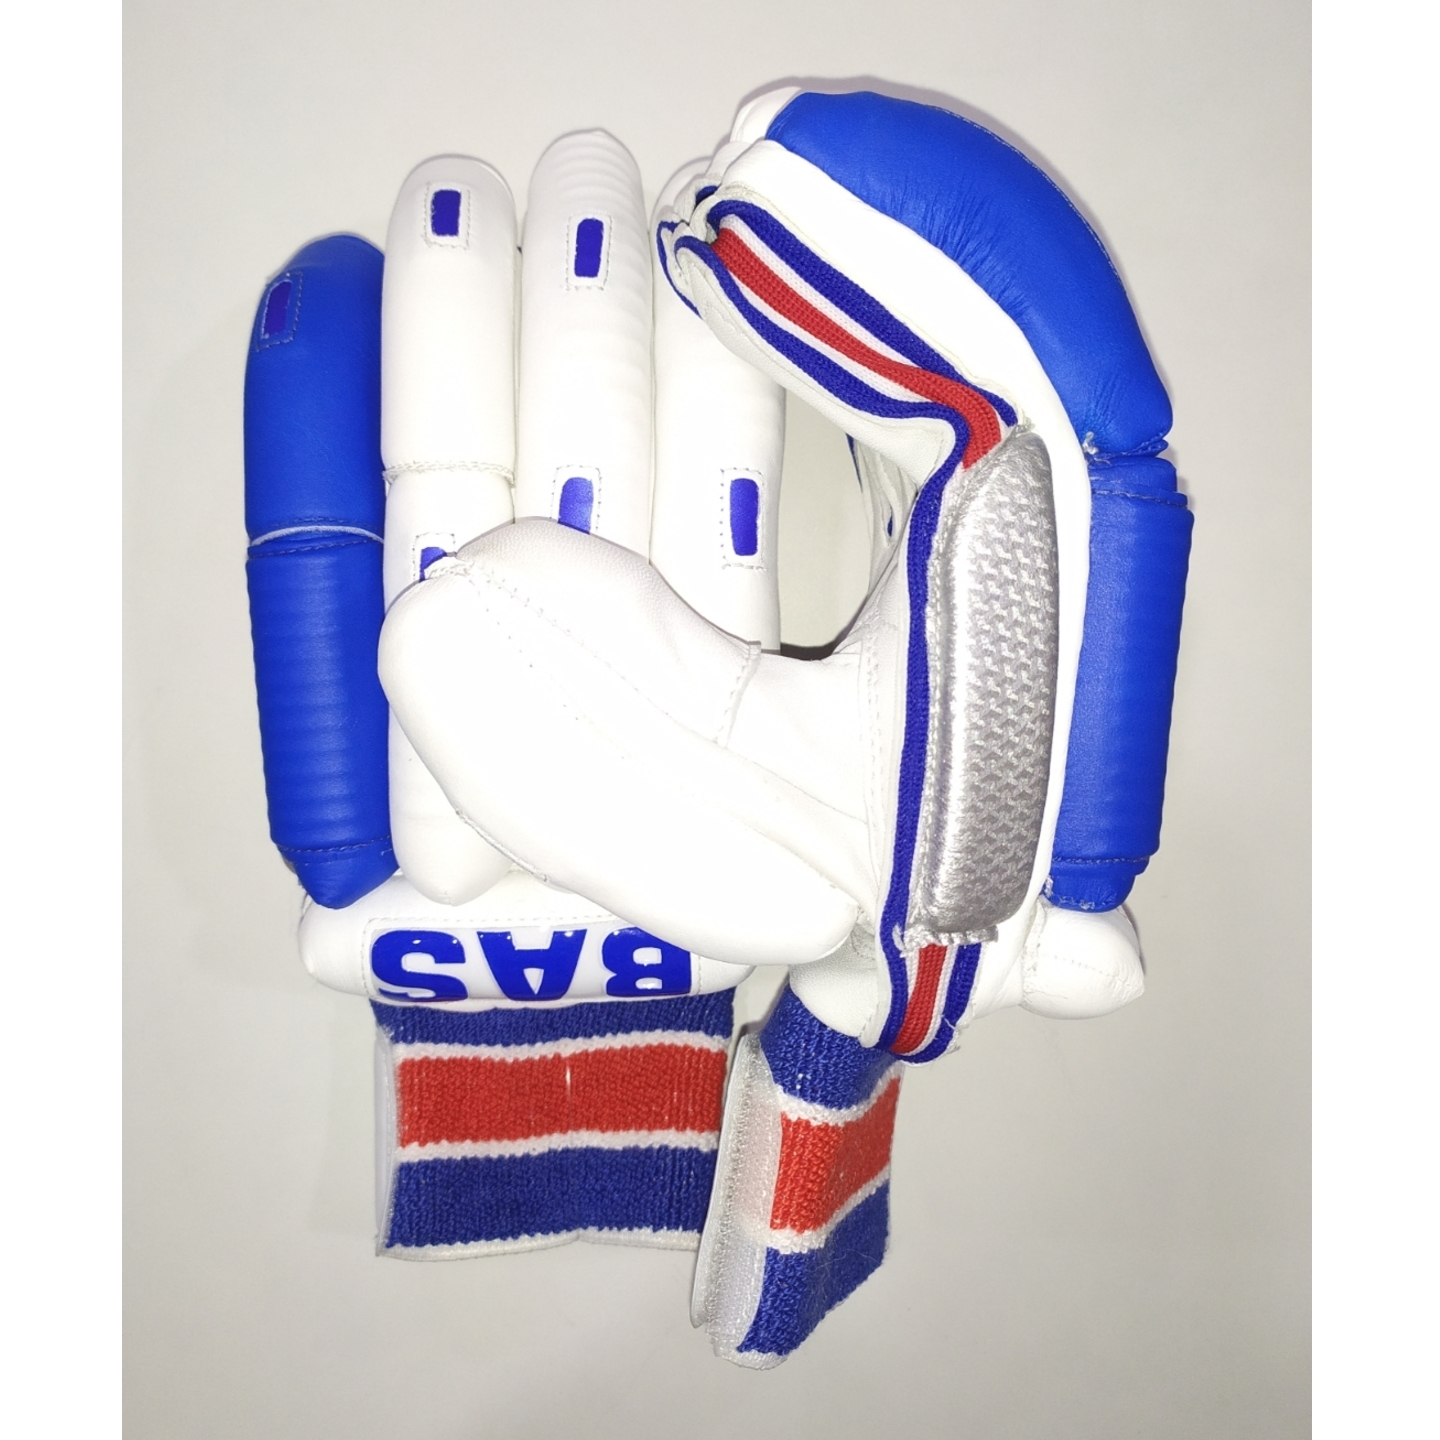 BAS PLAYER CRICKET BATTING GLOVES, RIGHT HANDED